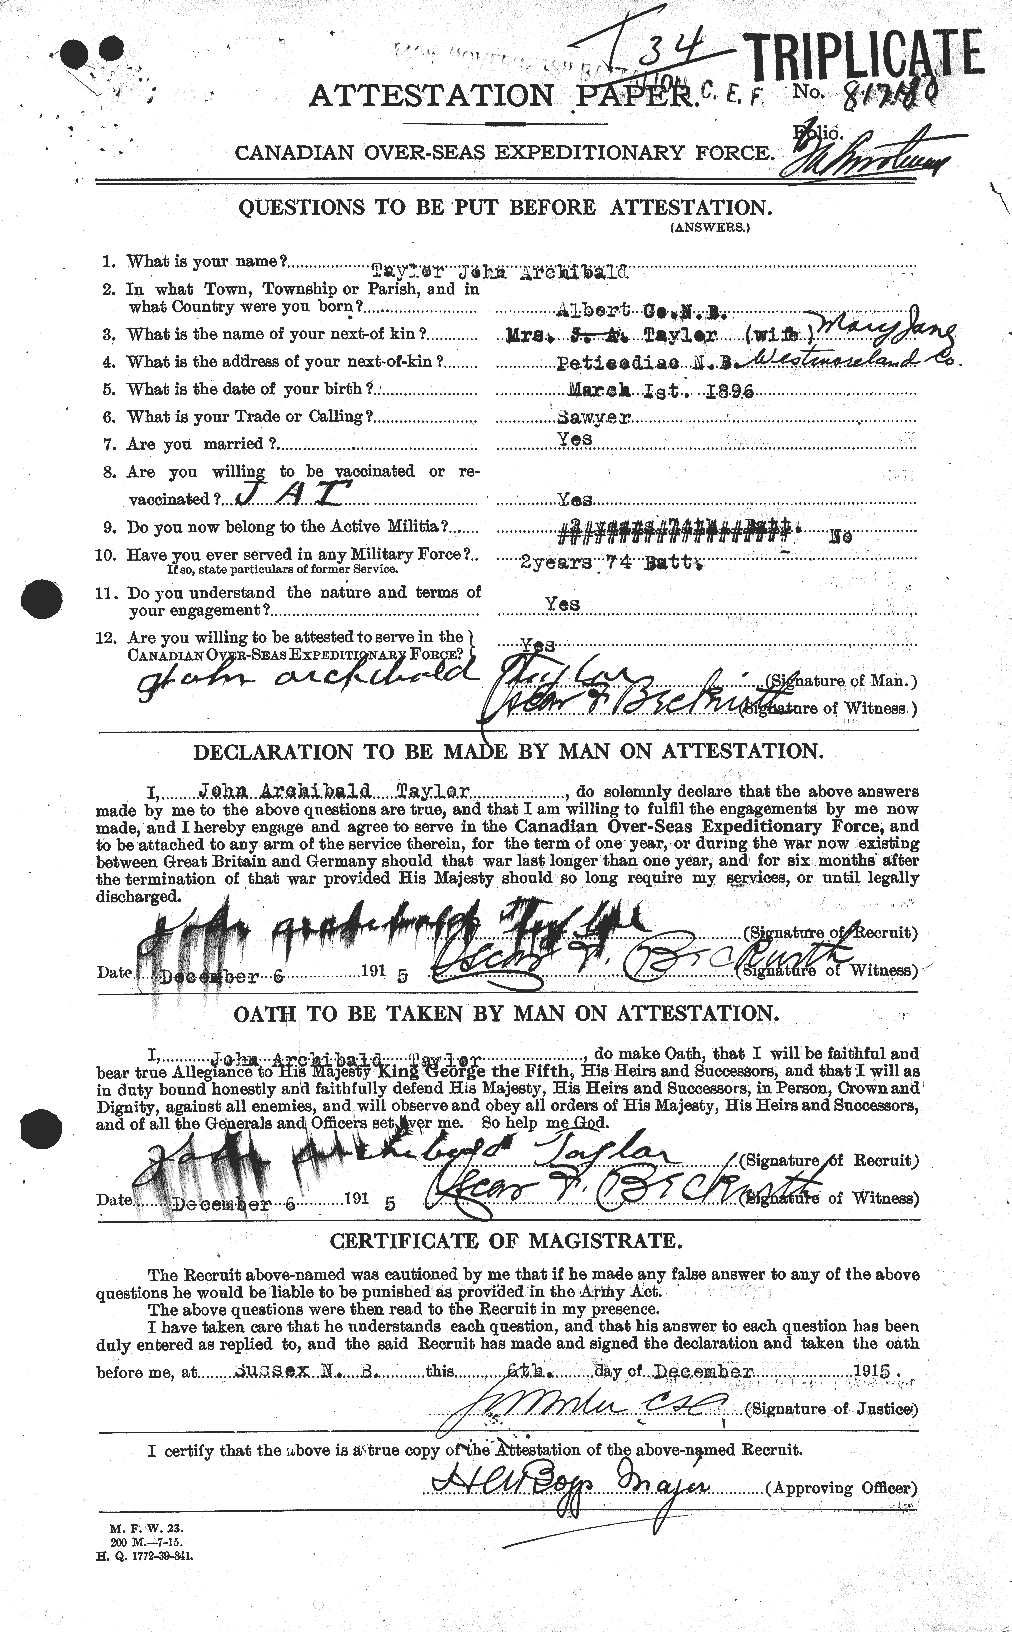 Personnel Records of the First World War - CEF 627048a